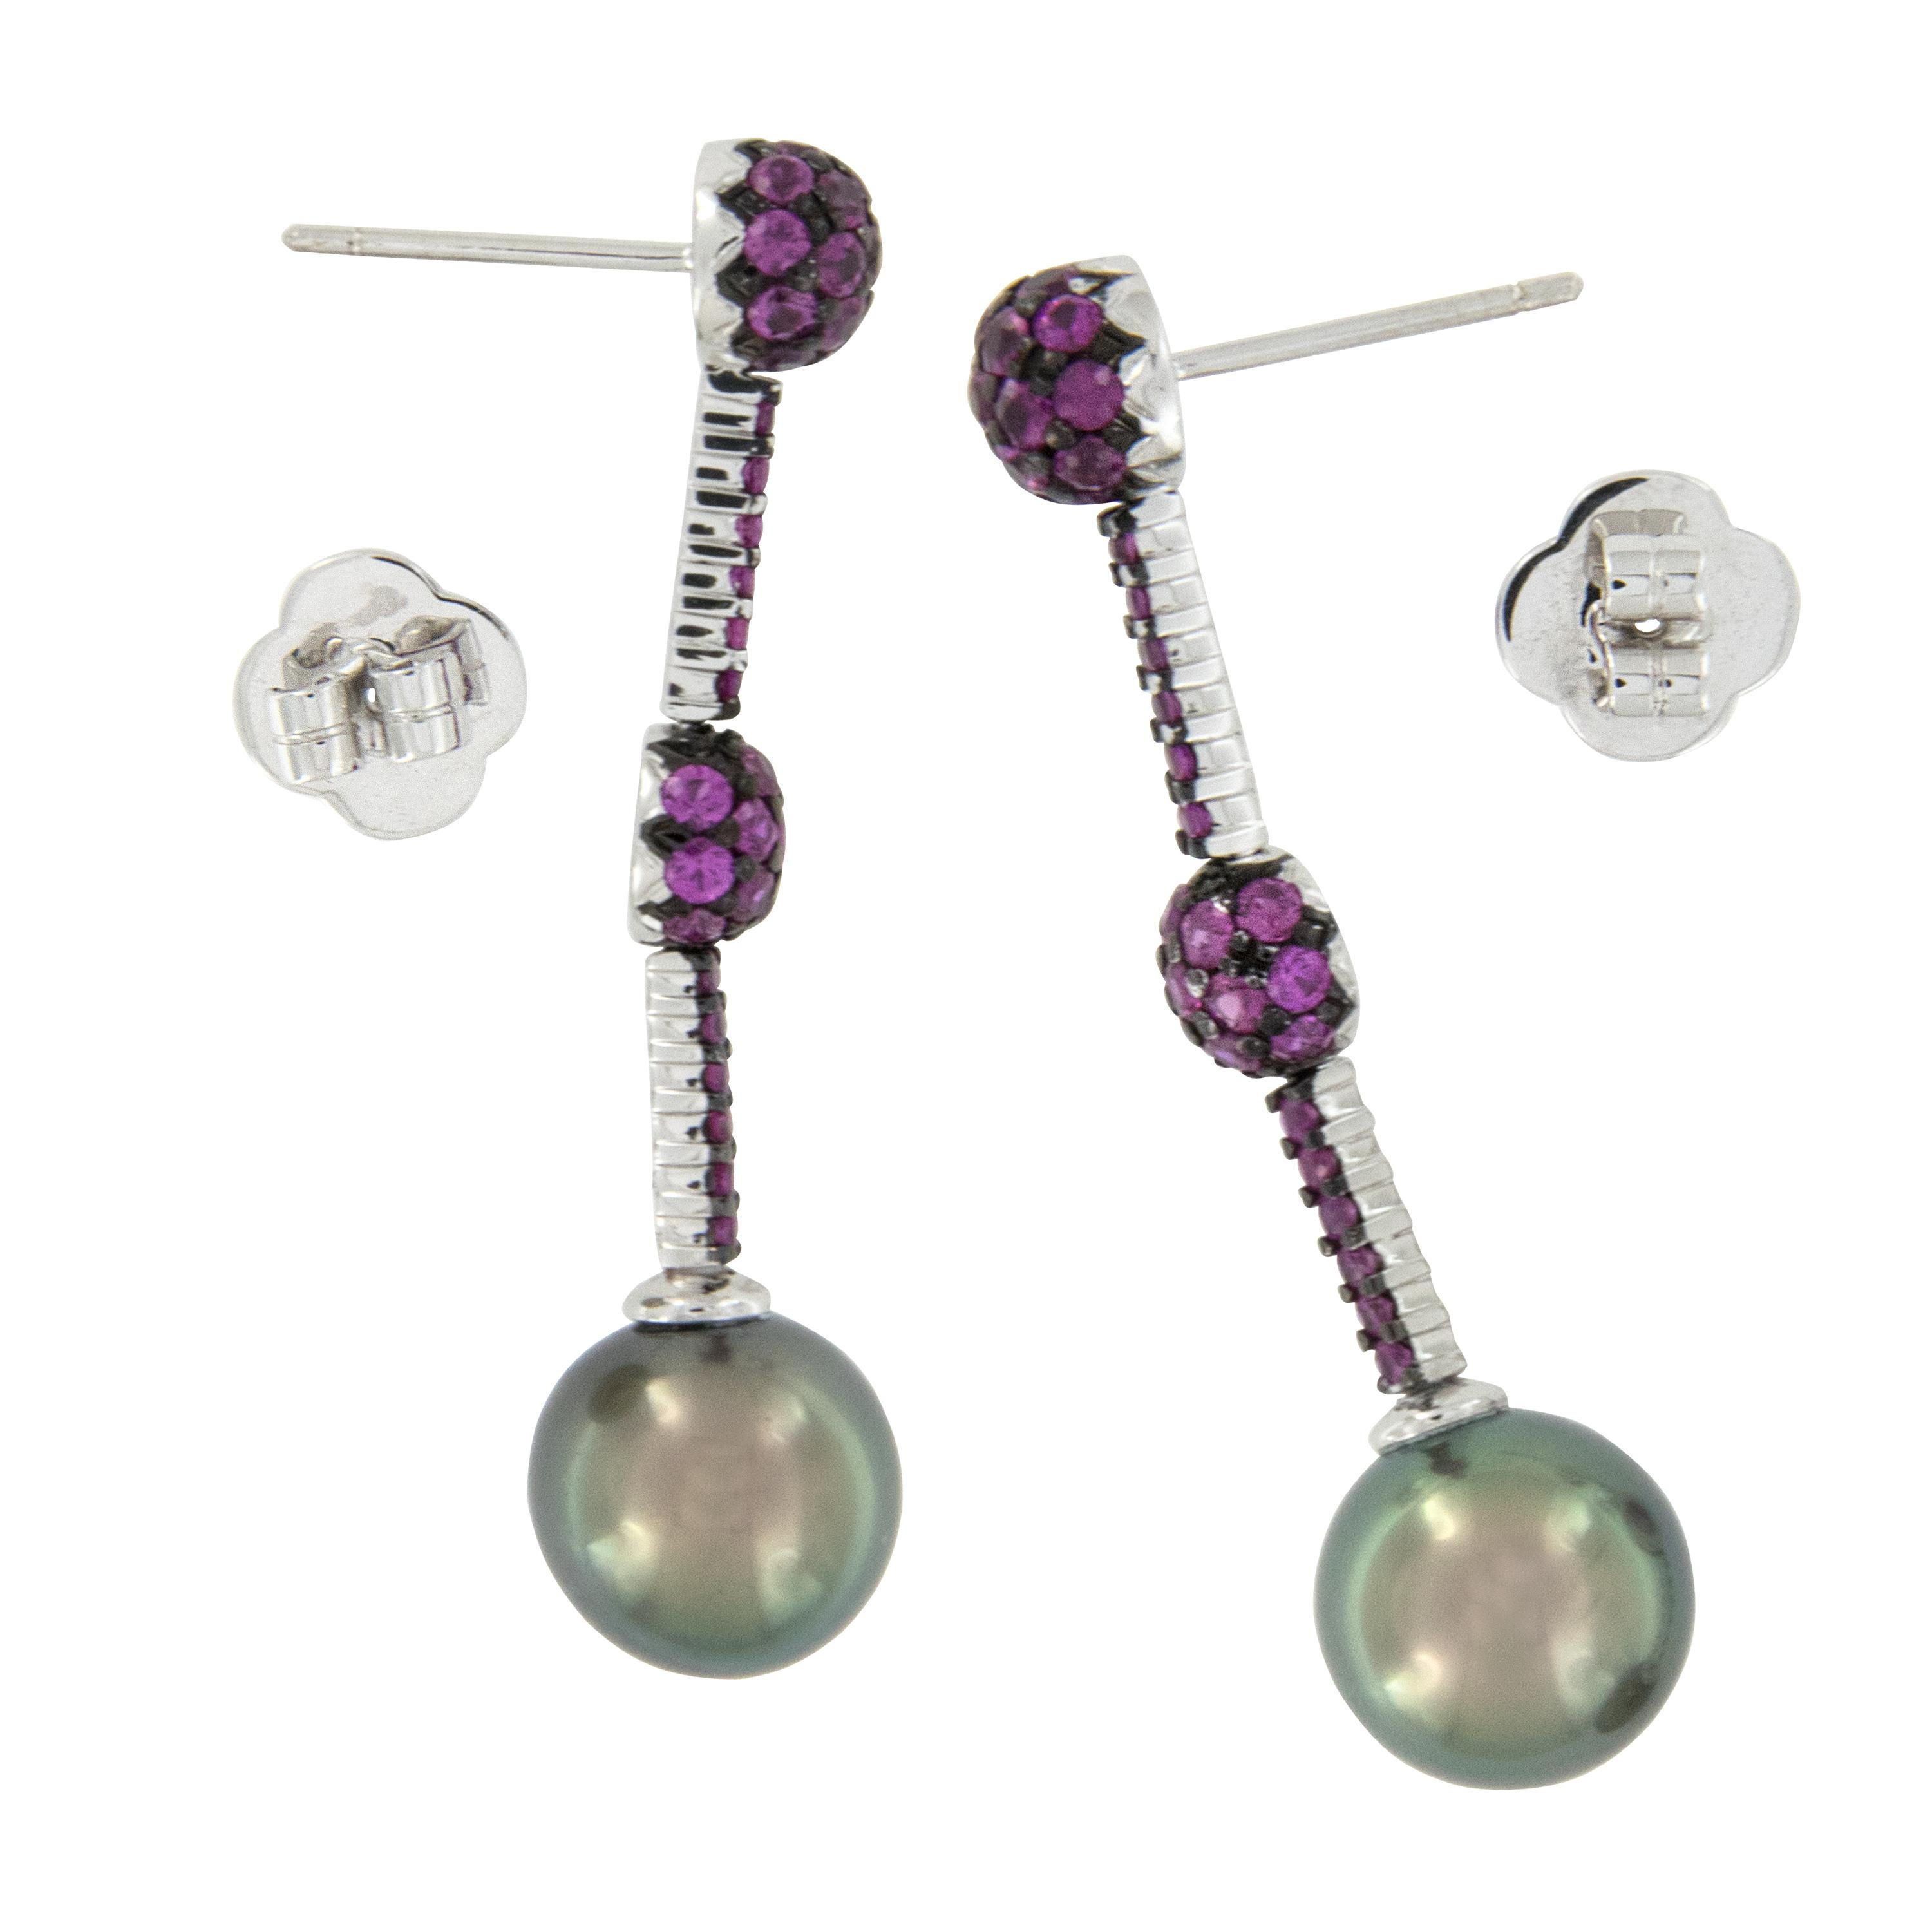 Hot! Hot! Hot! These stunning drop earrings have Tahitian pearls with rainbow like overtones that are further accented with hot pink sapphires = 2.47 Cttw.  Crafted in 18 karat white gold with posts & friction backs for security of wear!
Tahitian